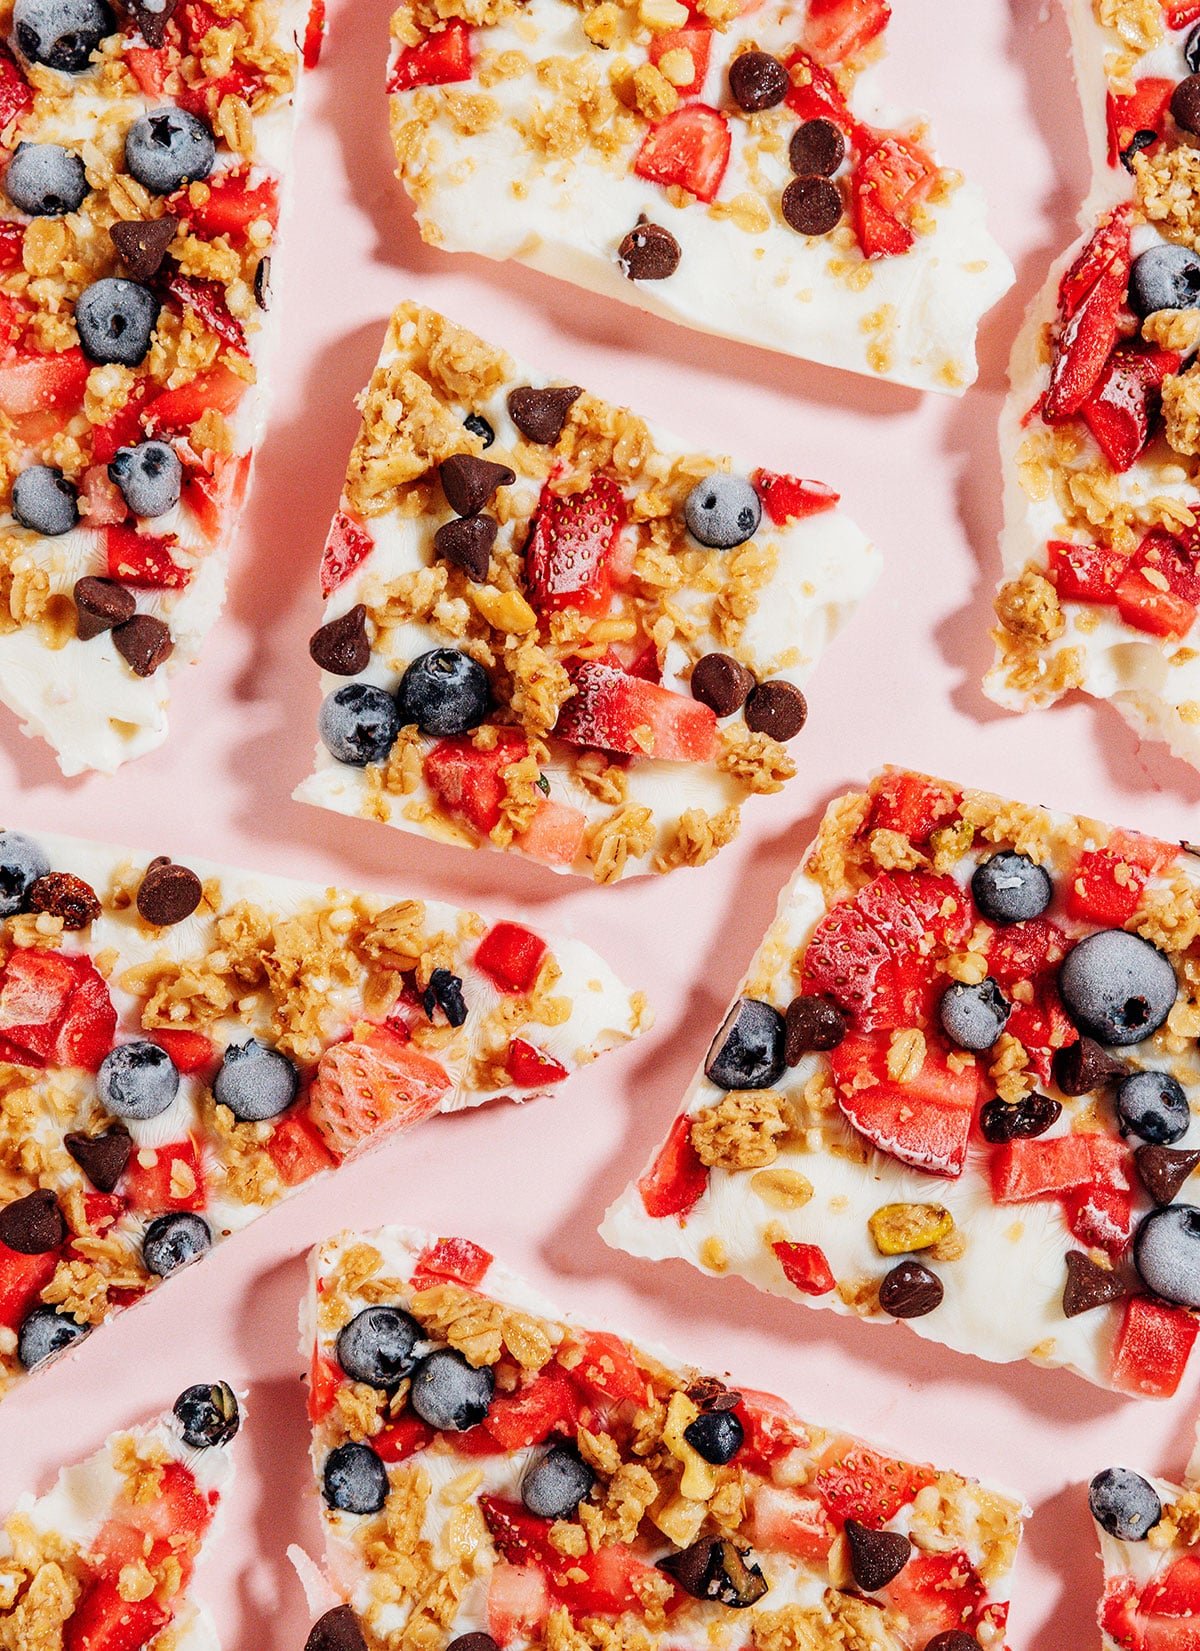 Frozen yogurt breakfast bark with berries and granola on a pink background.